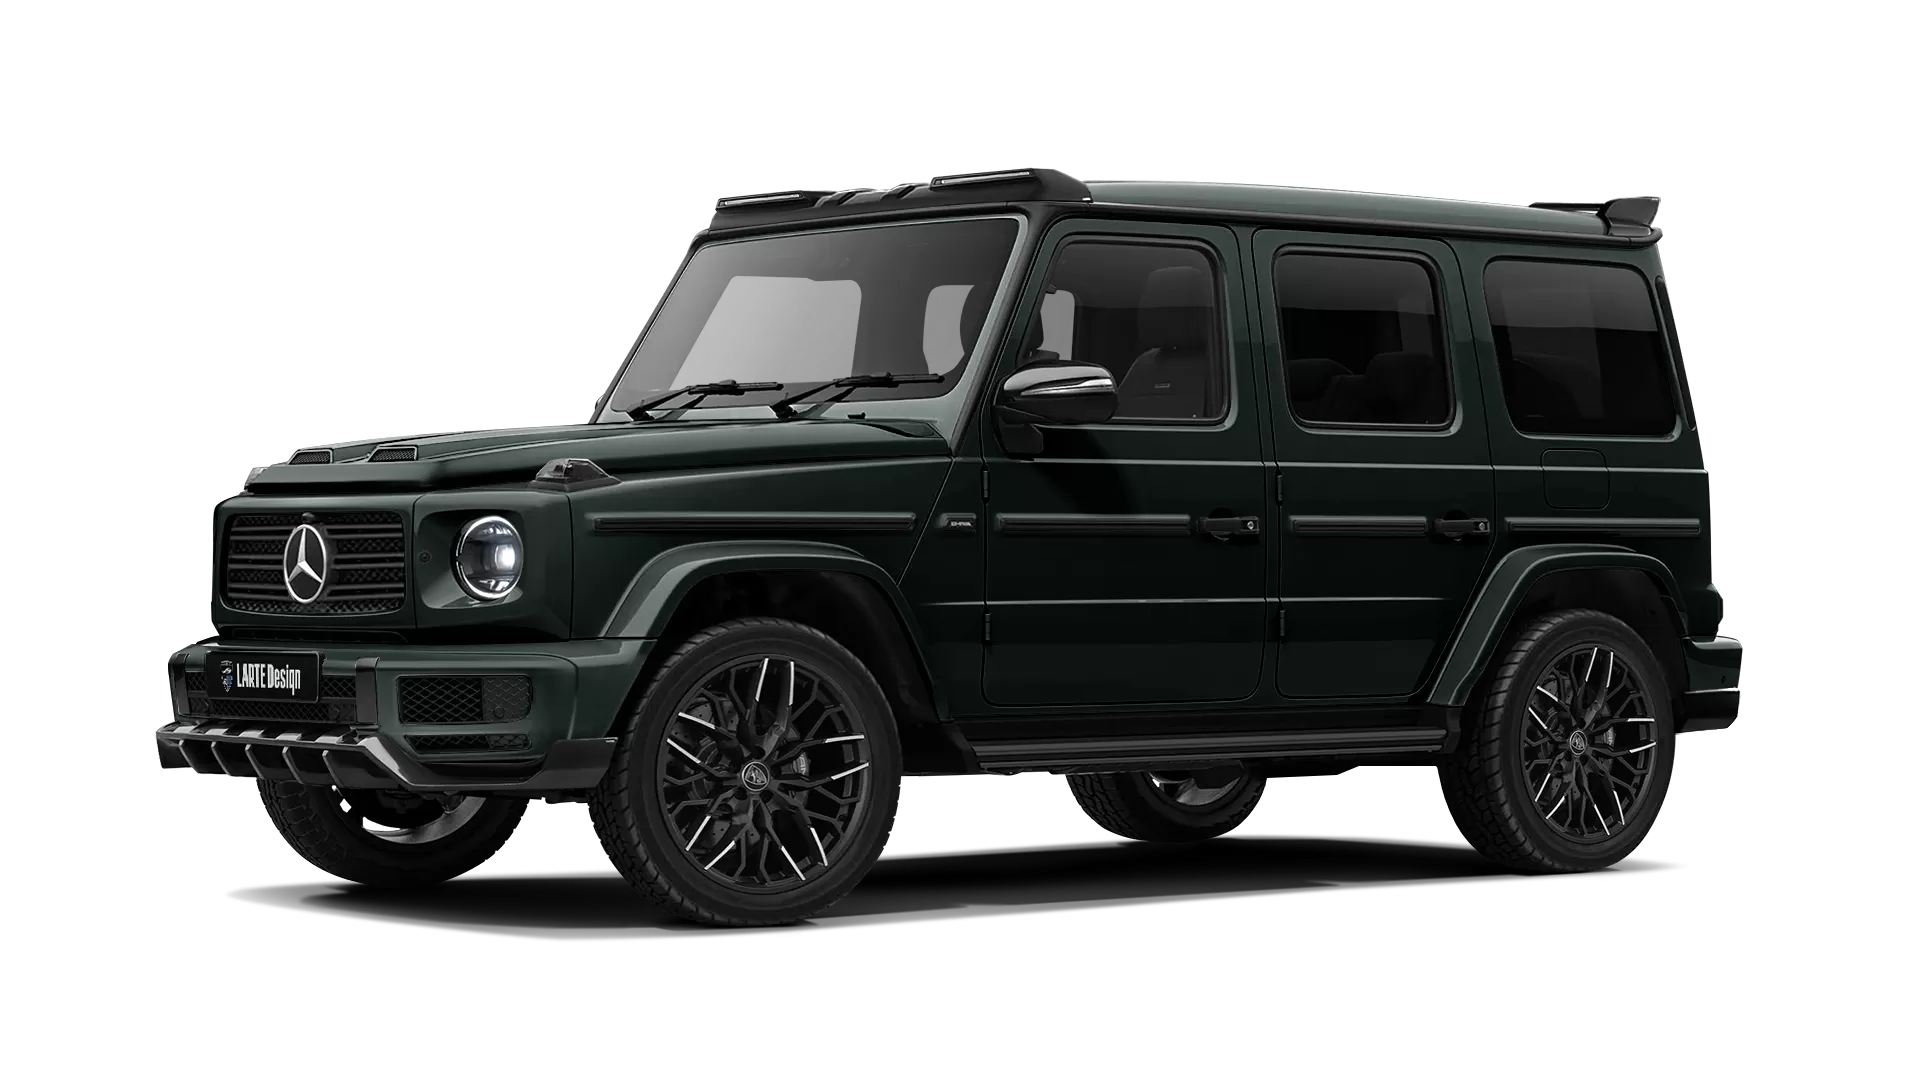 Mercedes G class W463 with painted body kit: front view shown in Dark Green